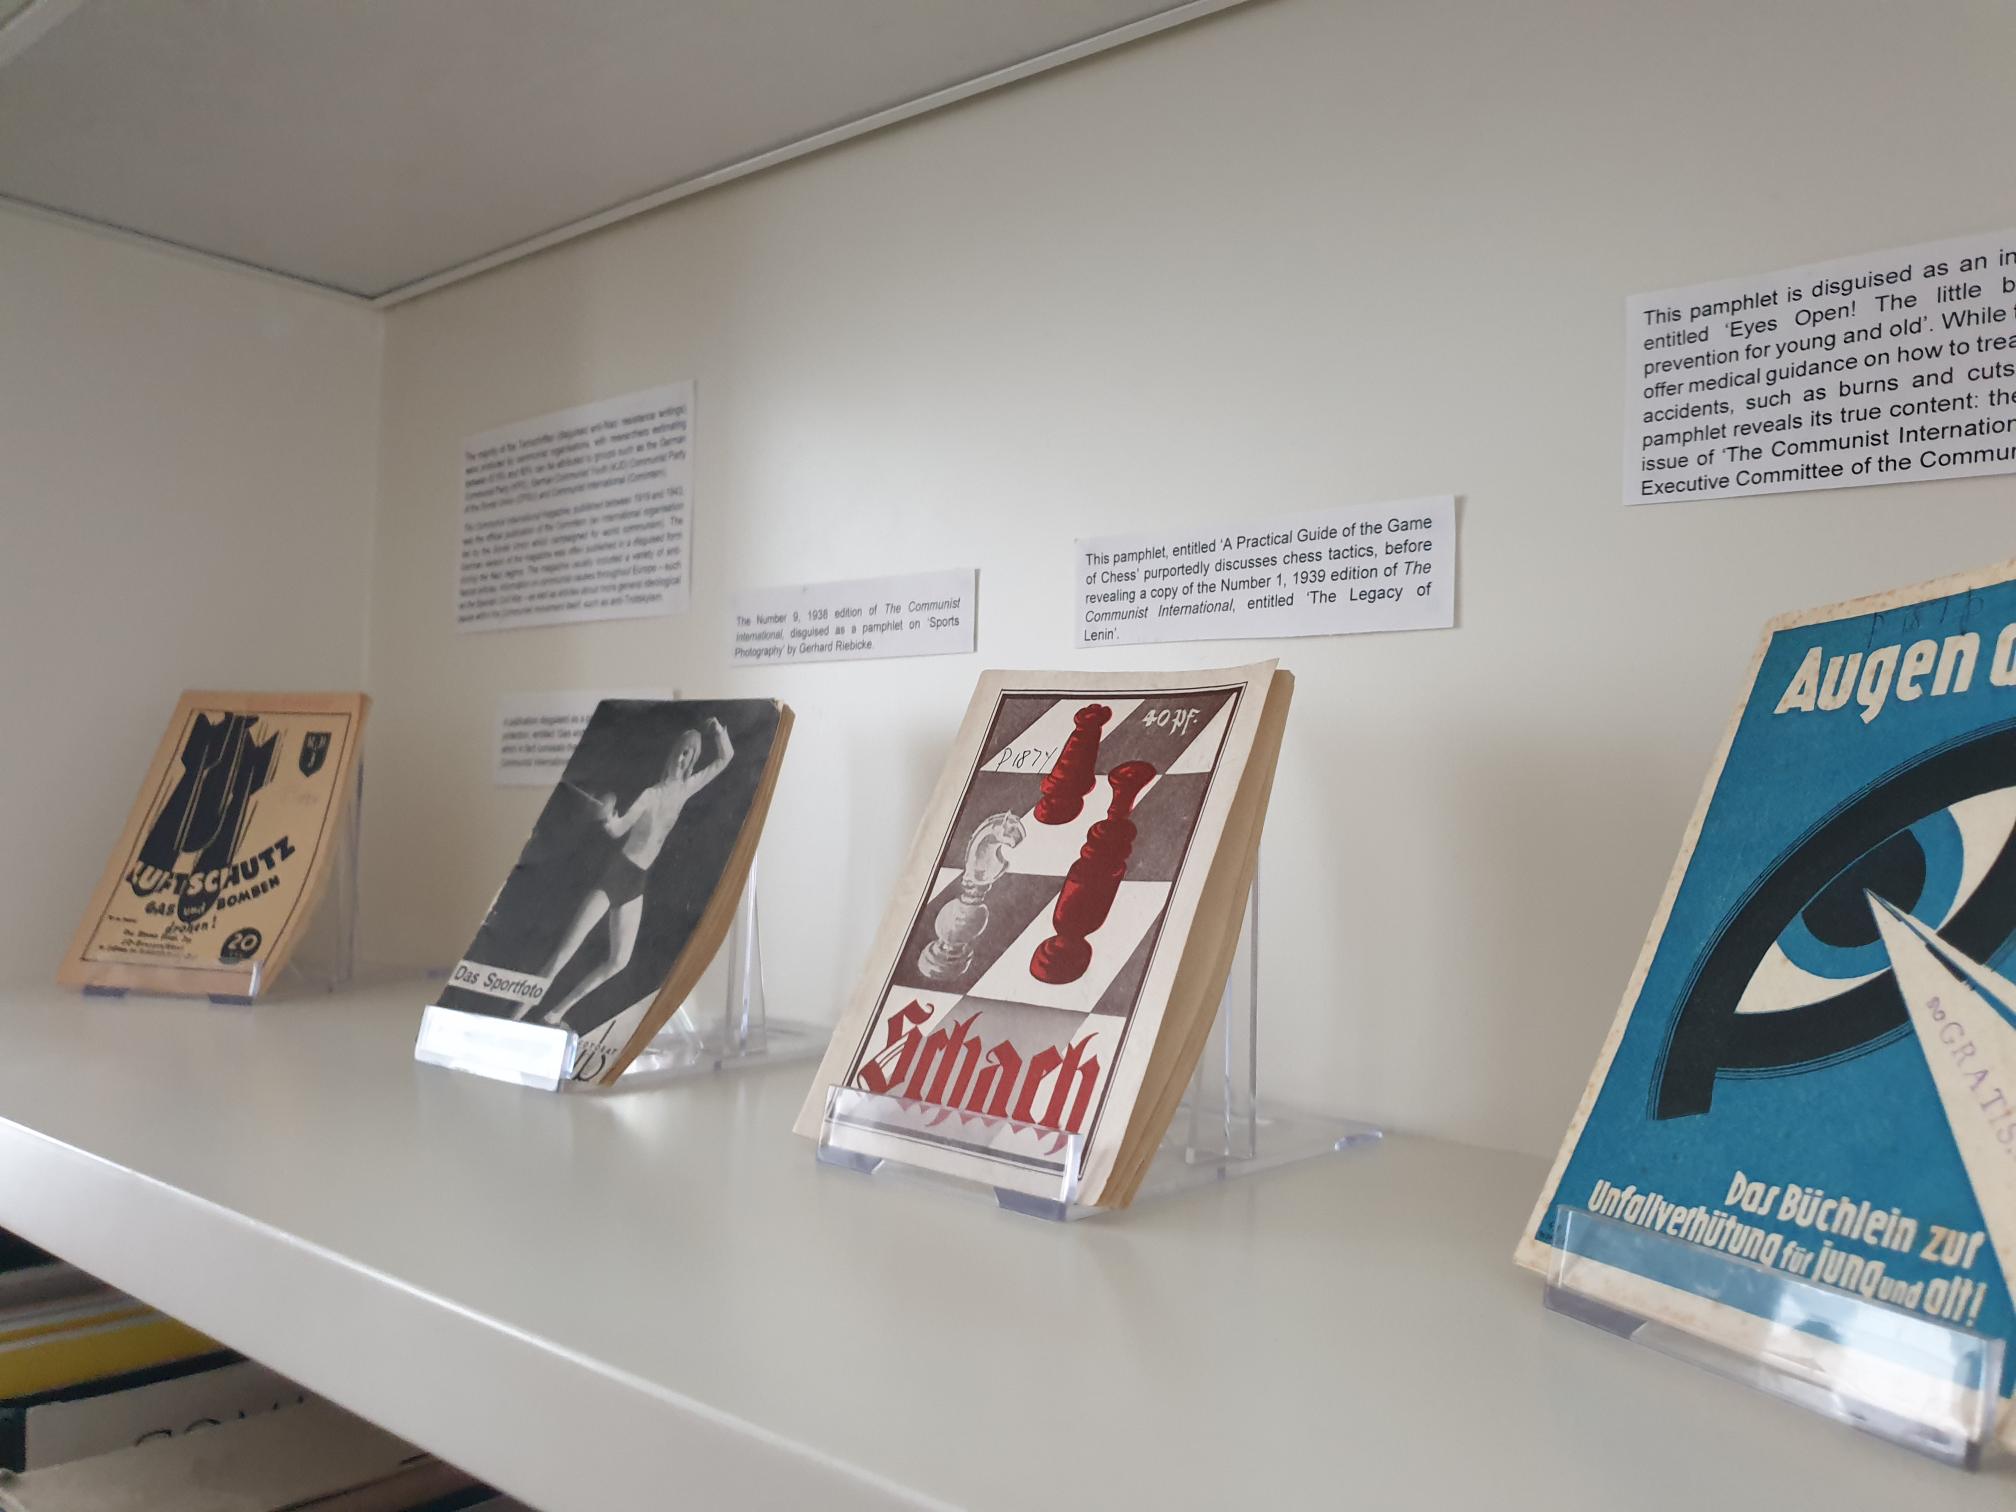 Exhibition in the Reading Room of The Wiener Holocaust Library